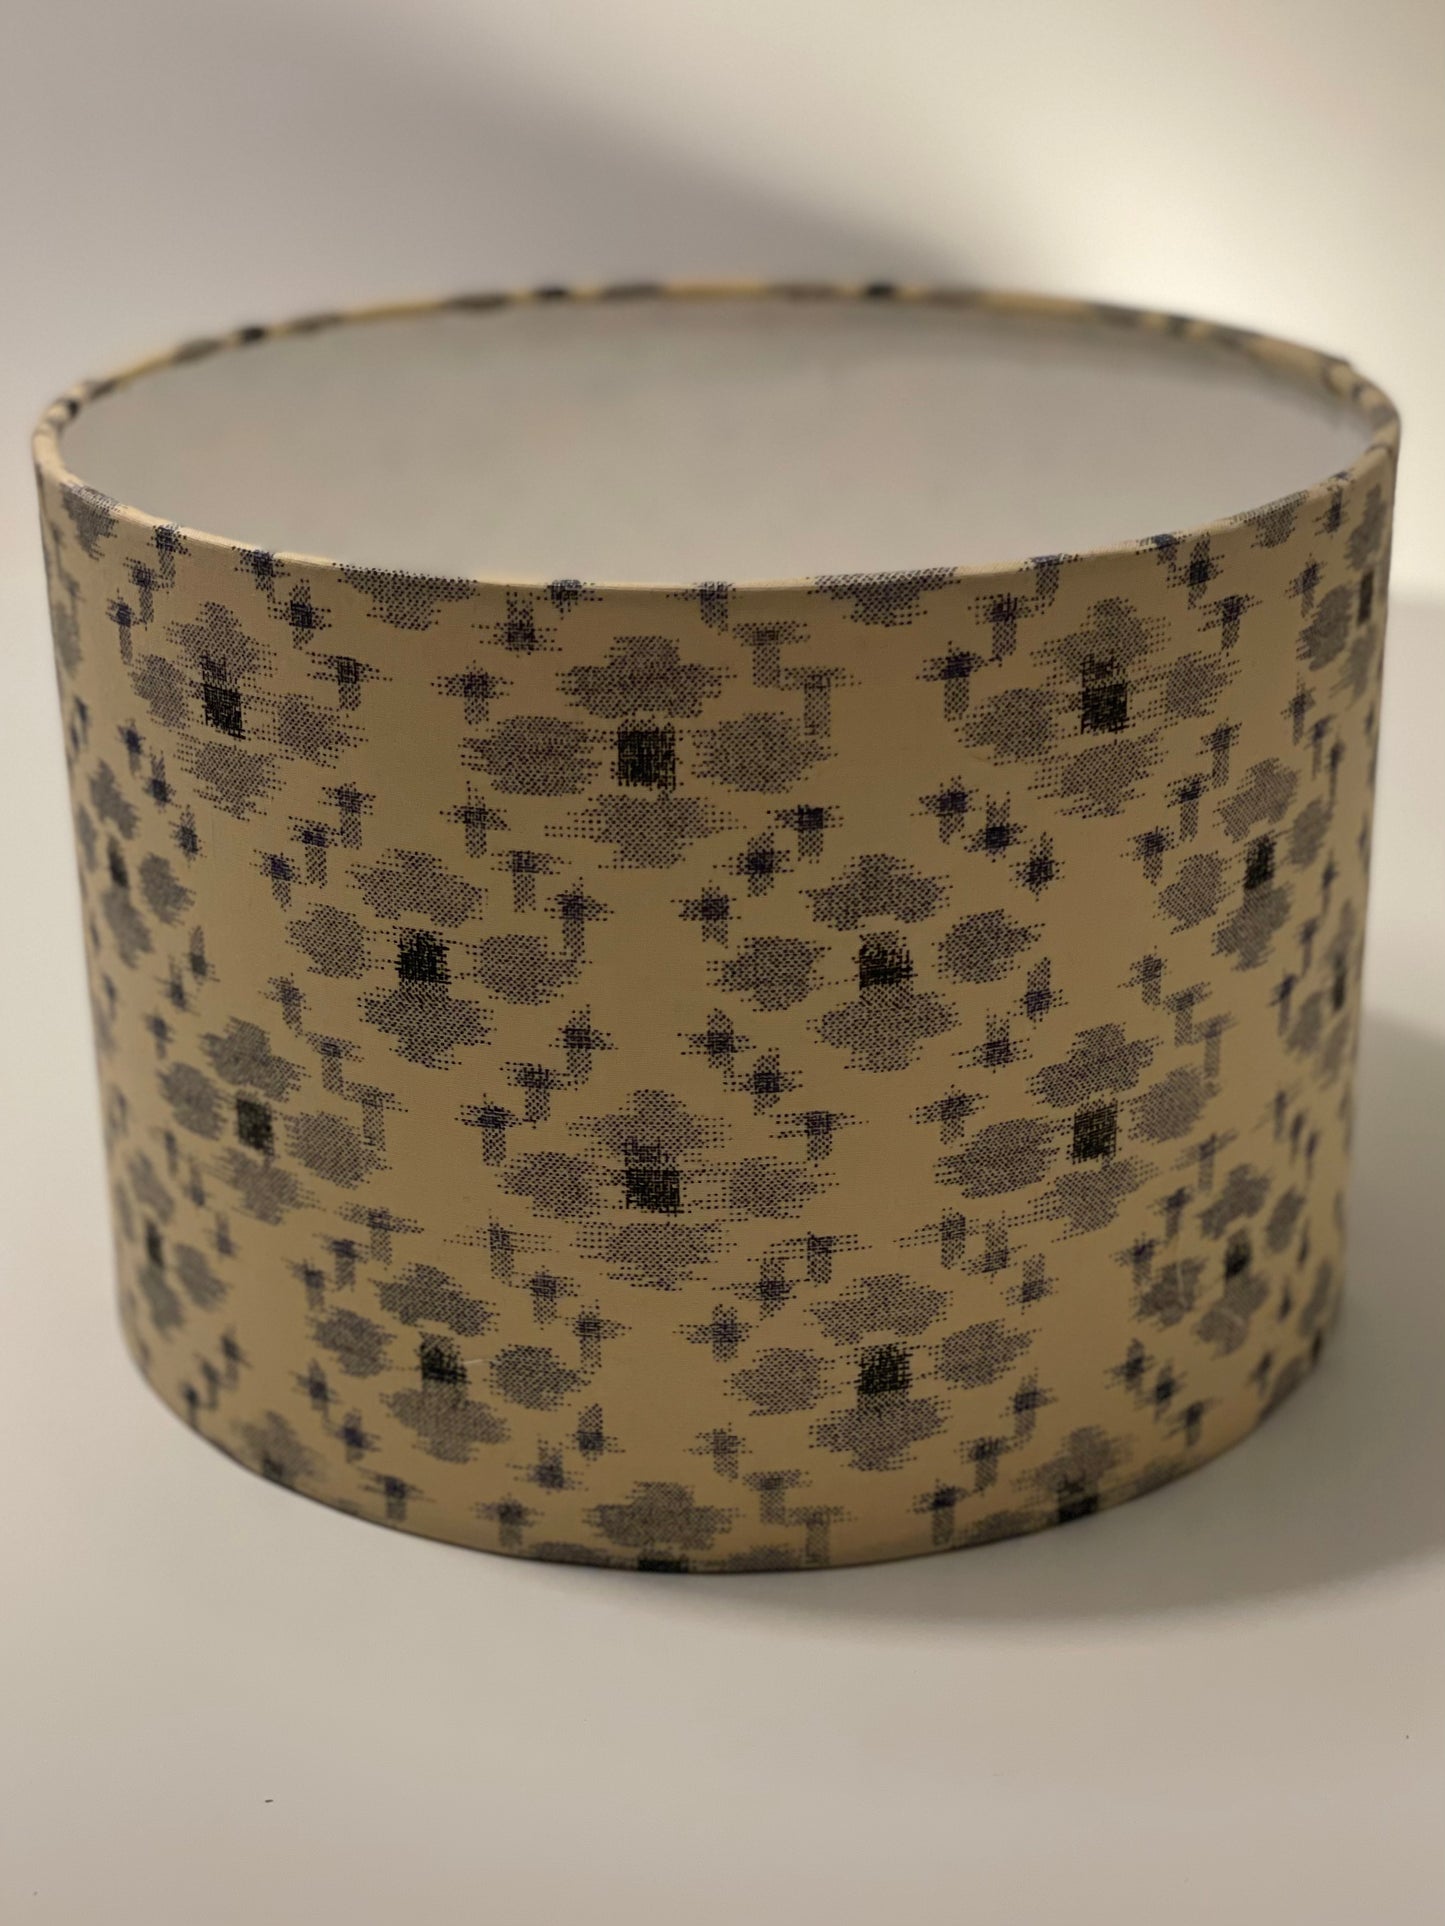 10 inch Drum Lampshade. Traditional Japanese Fabric. Sand with Blue-Gray "Igeta" Grid Pattern.